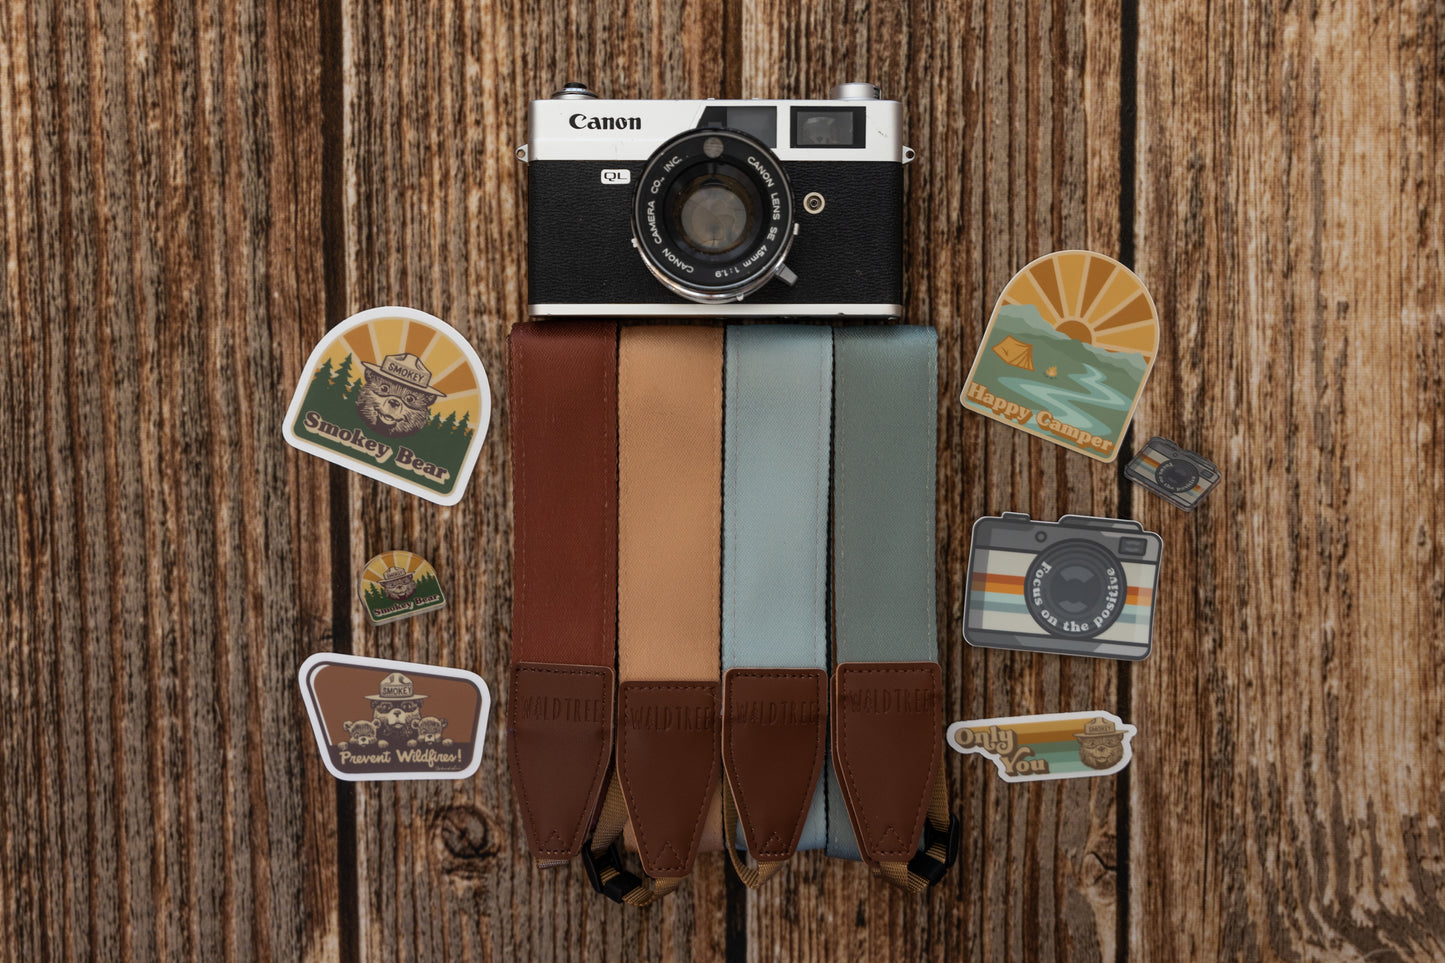 Retro Camera acrylic pin on wood background with other camera strap, stickers and pins